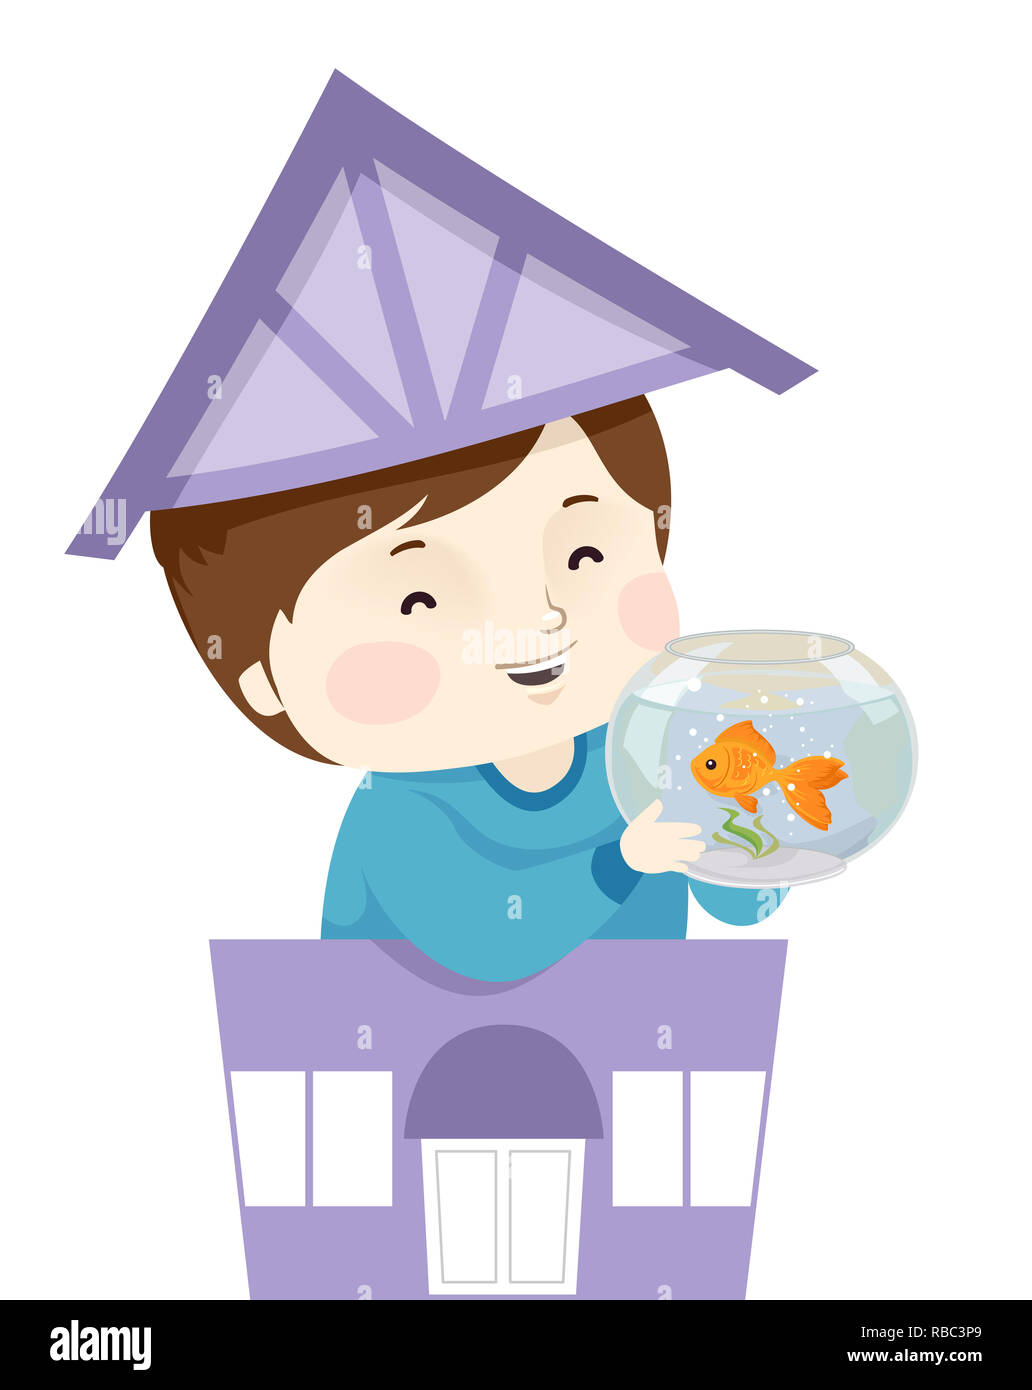 Illustration of a Kid Boy Holding a Goldfish in an Aquarium Bowl from a Pet Shop Stock Photo